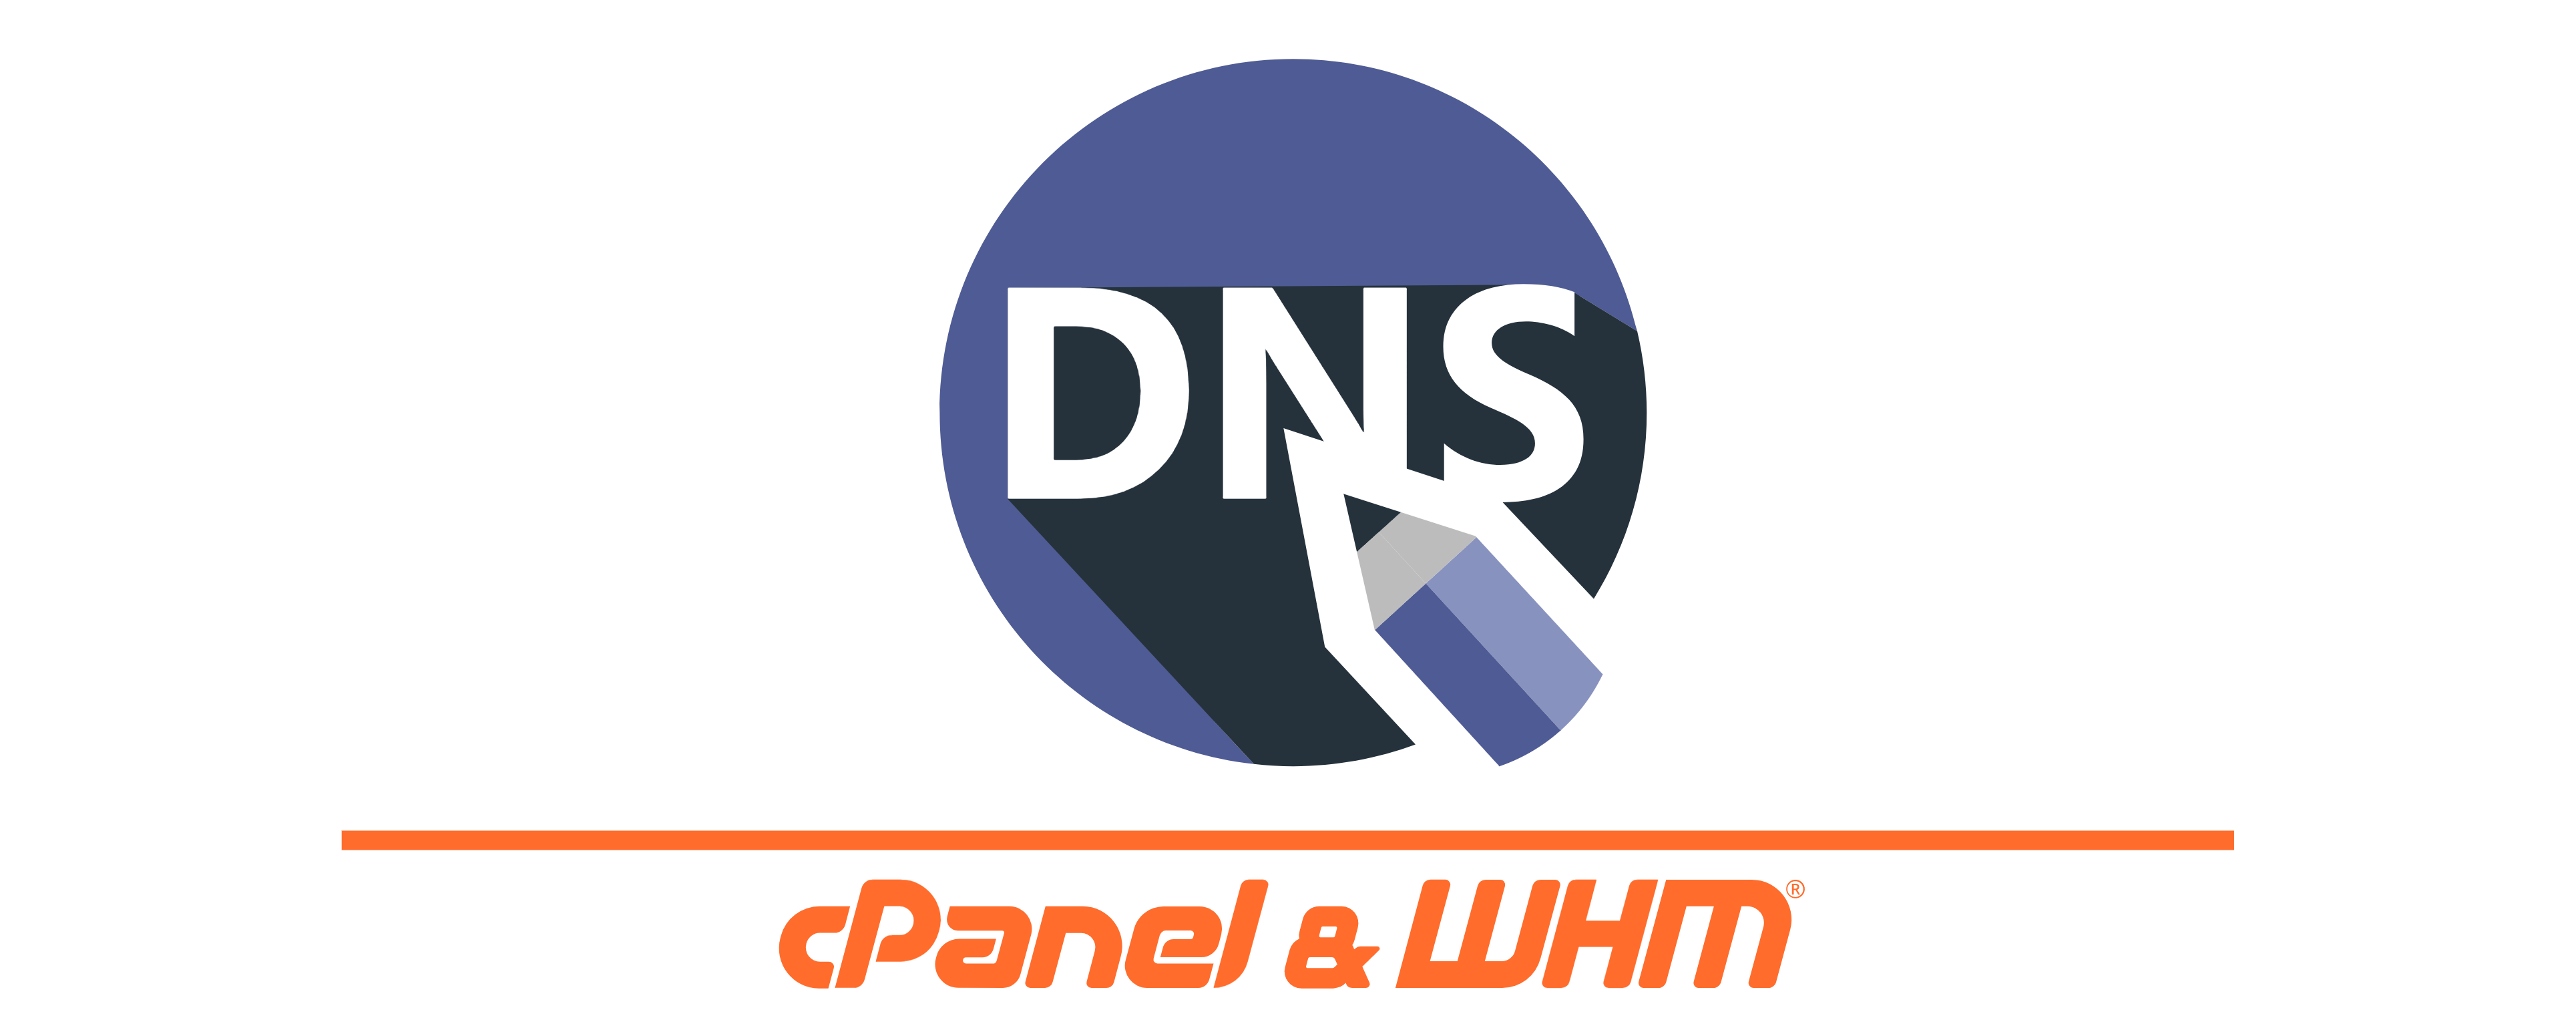 Move Over MyDNS and NSD- Here Comes PowerDNS!